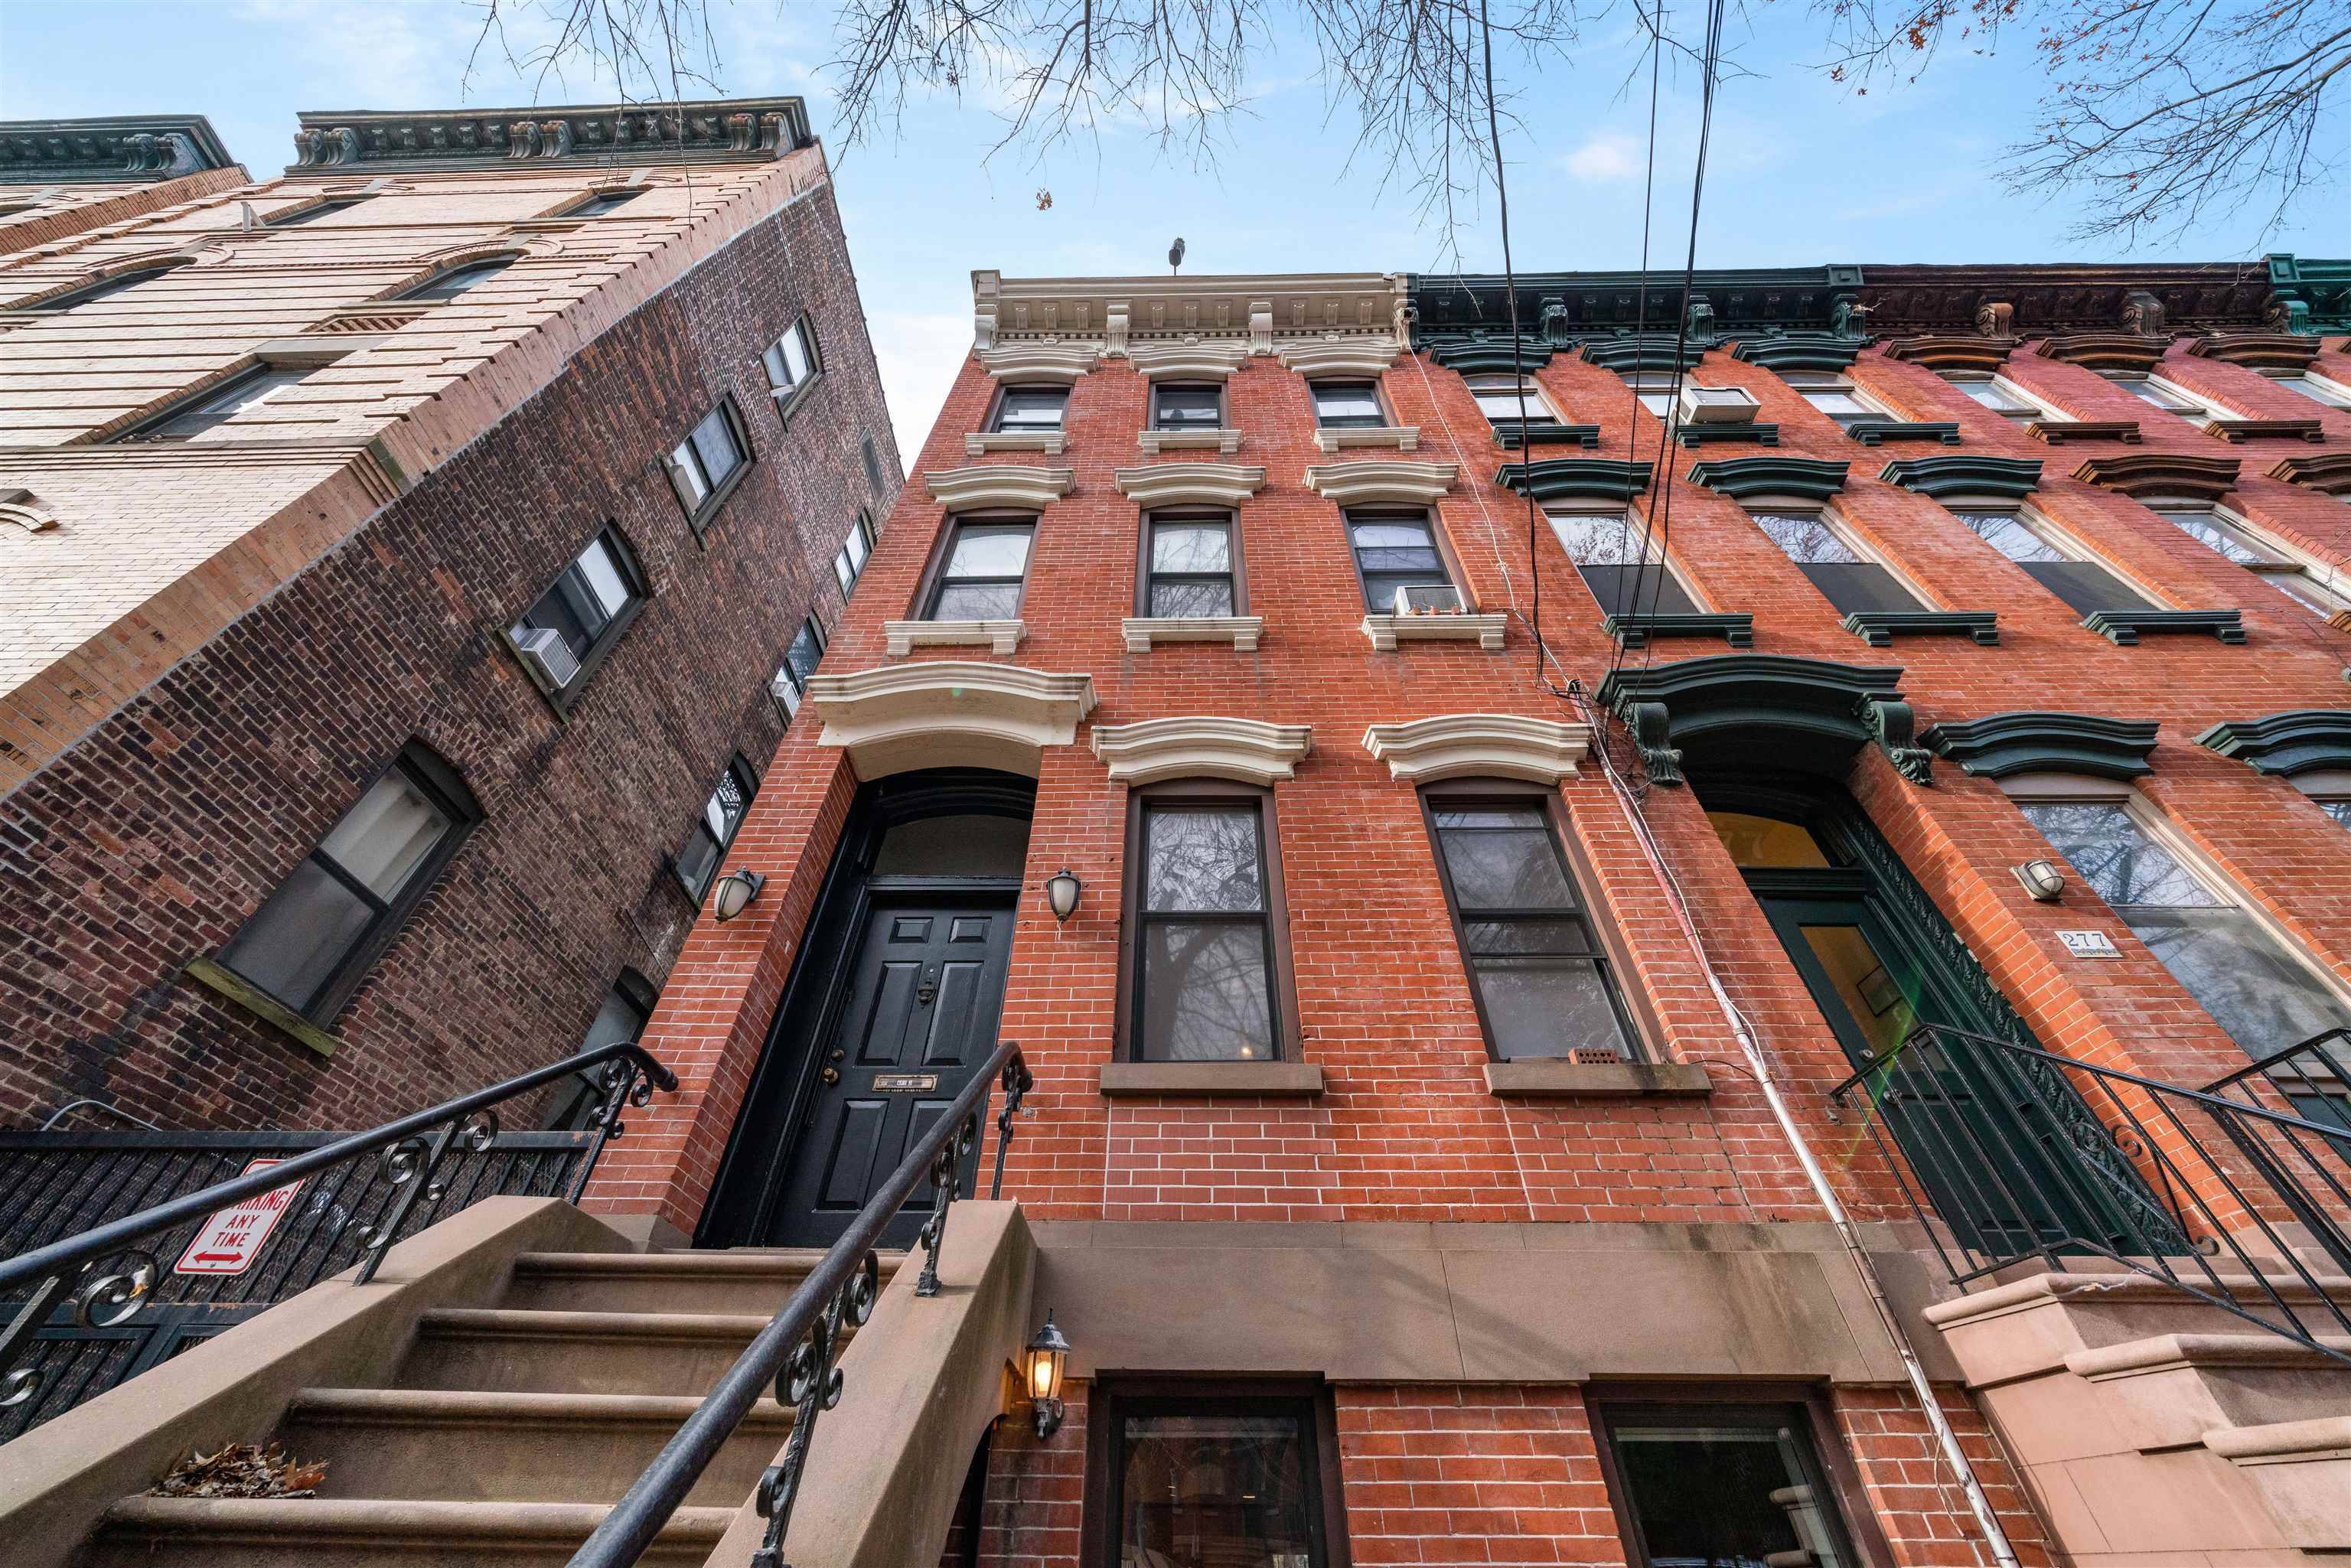 Historic Two Family Brownstone with Exposed Brick and Cathedral-like High Ceilings in Downtown Jersey City